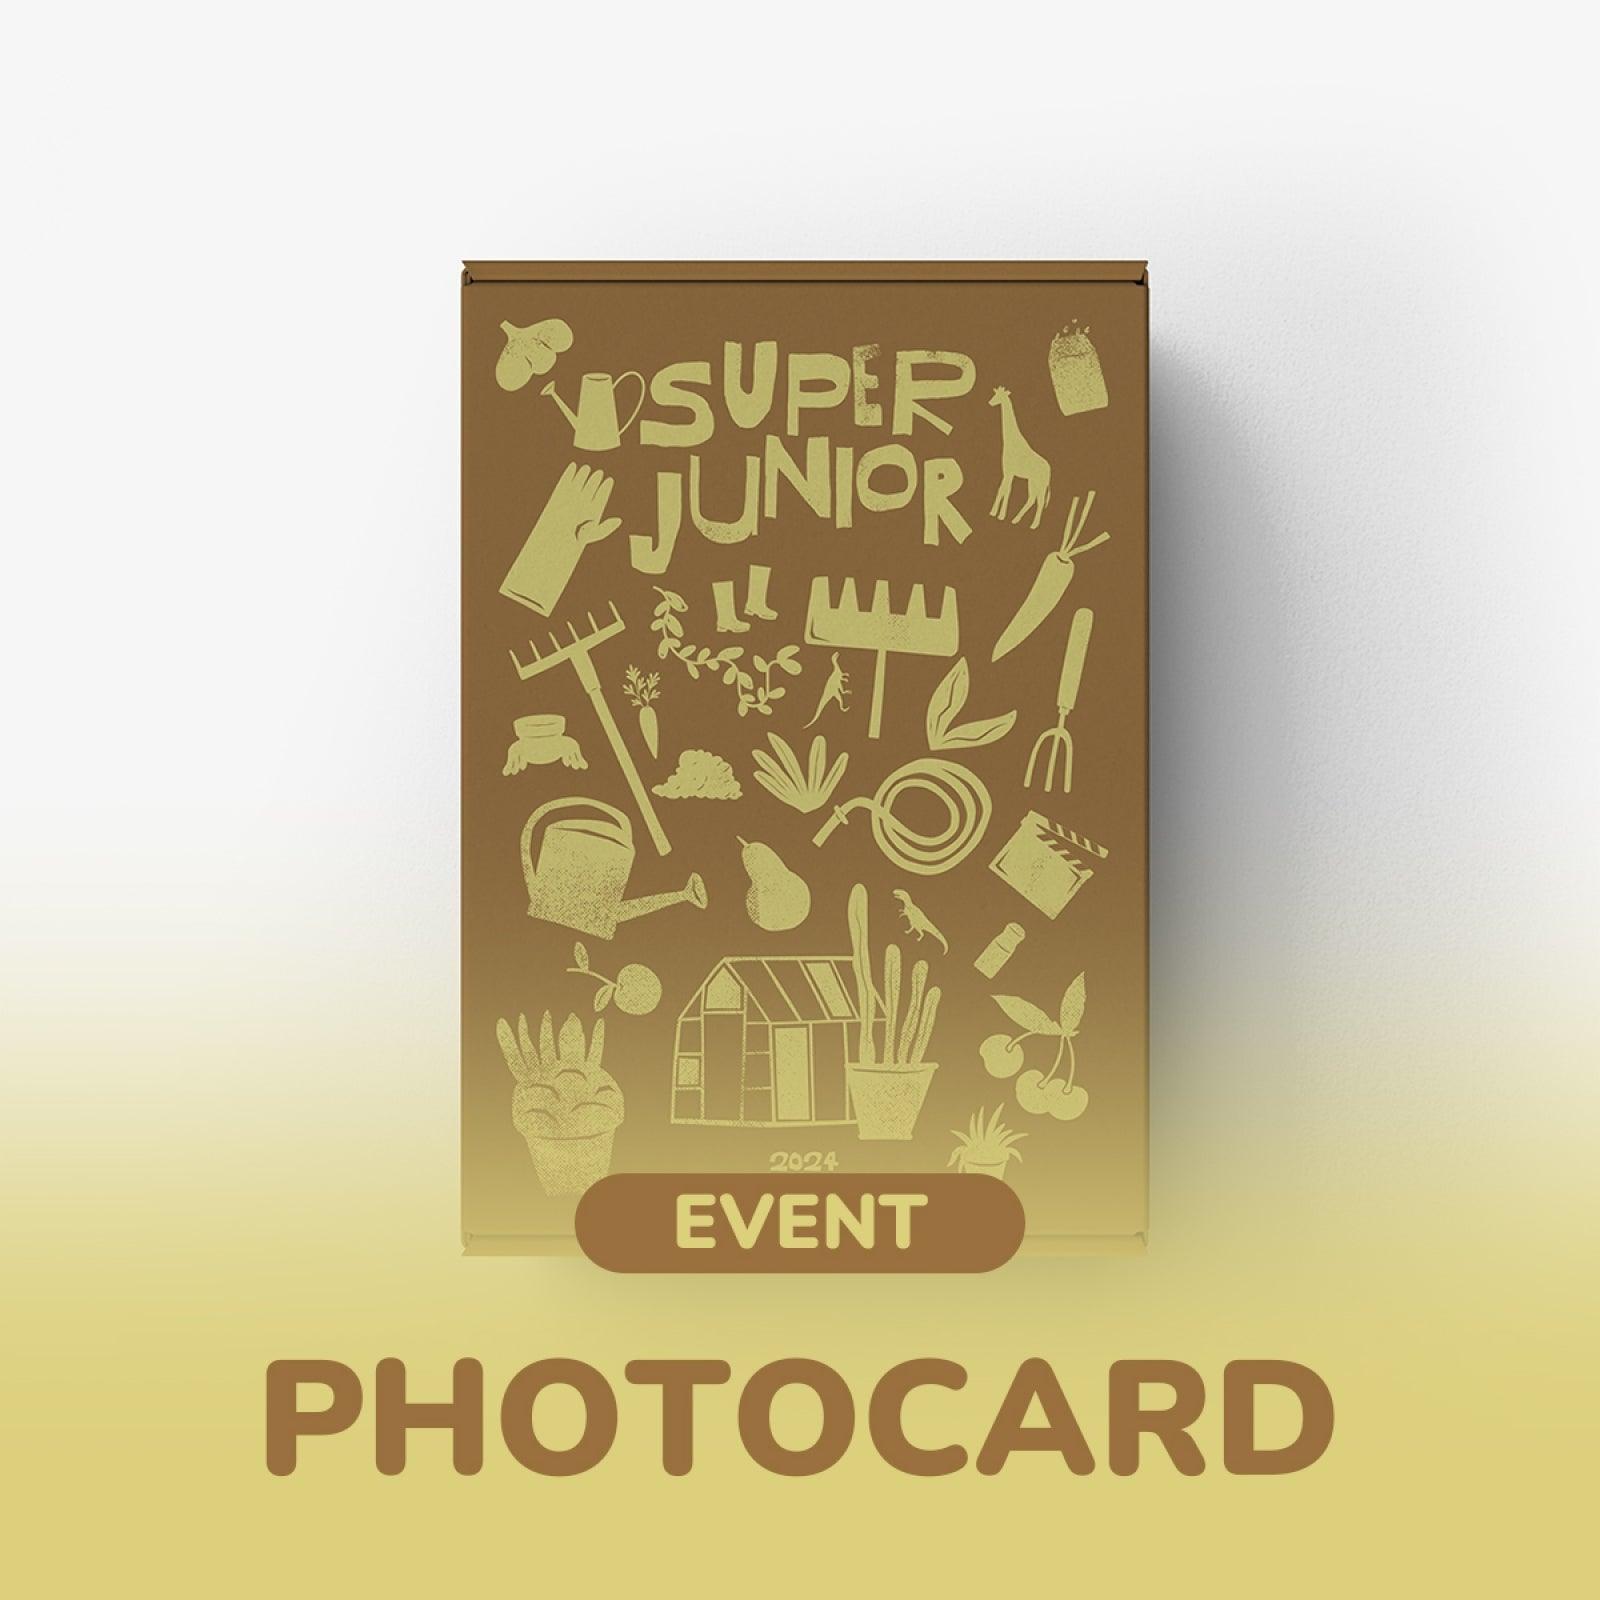 [PRE - ORDER] SM ENTERTAINMENT 2024 SEASON’S GREETINGS [PHOTO CARD EVENT](HOTTRACKS VER.) - Shopping Around the World with Goodsnjoy